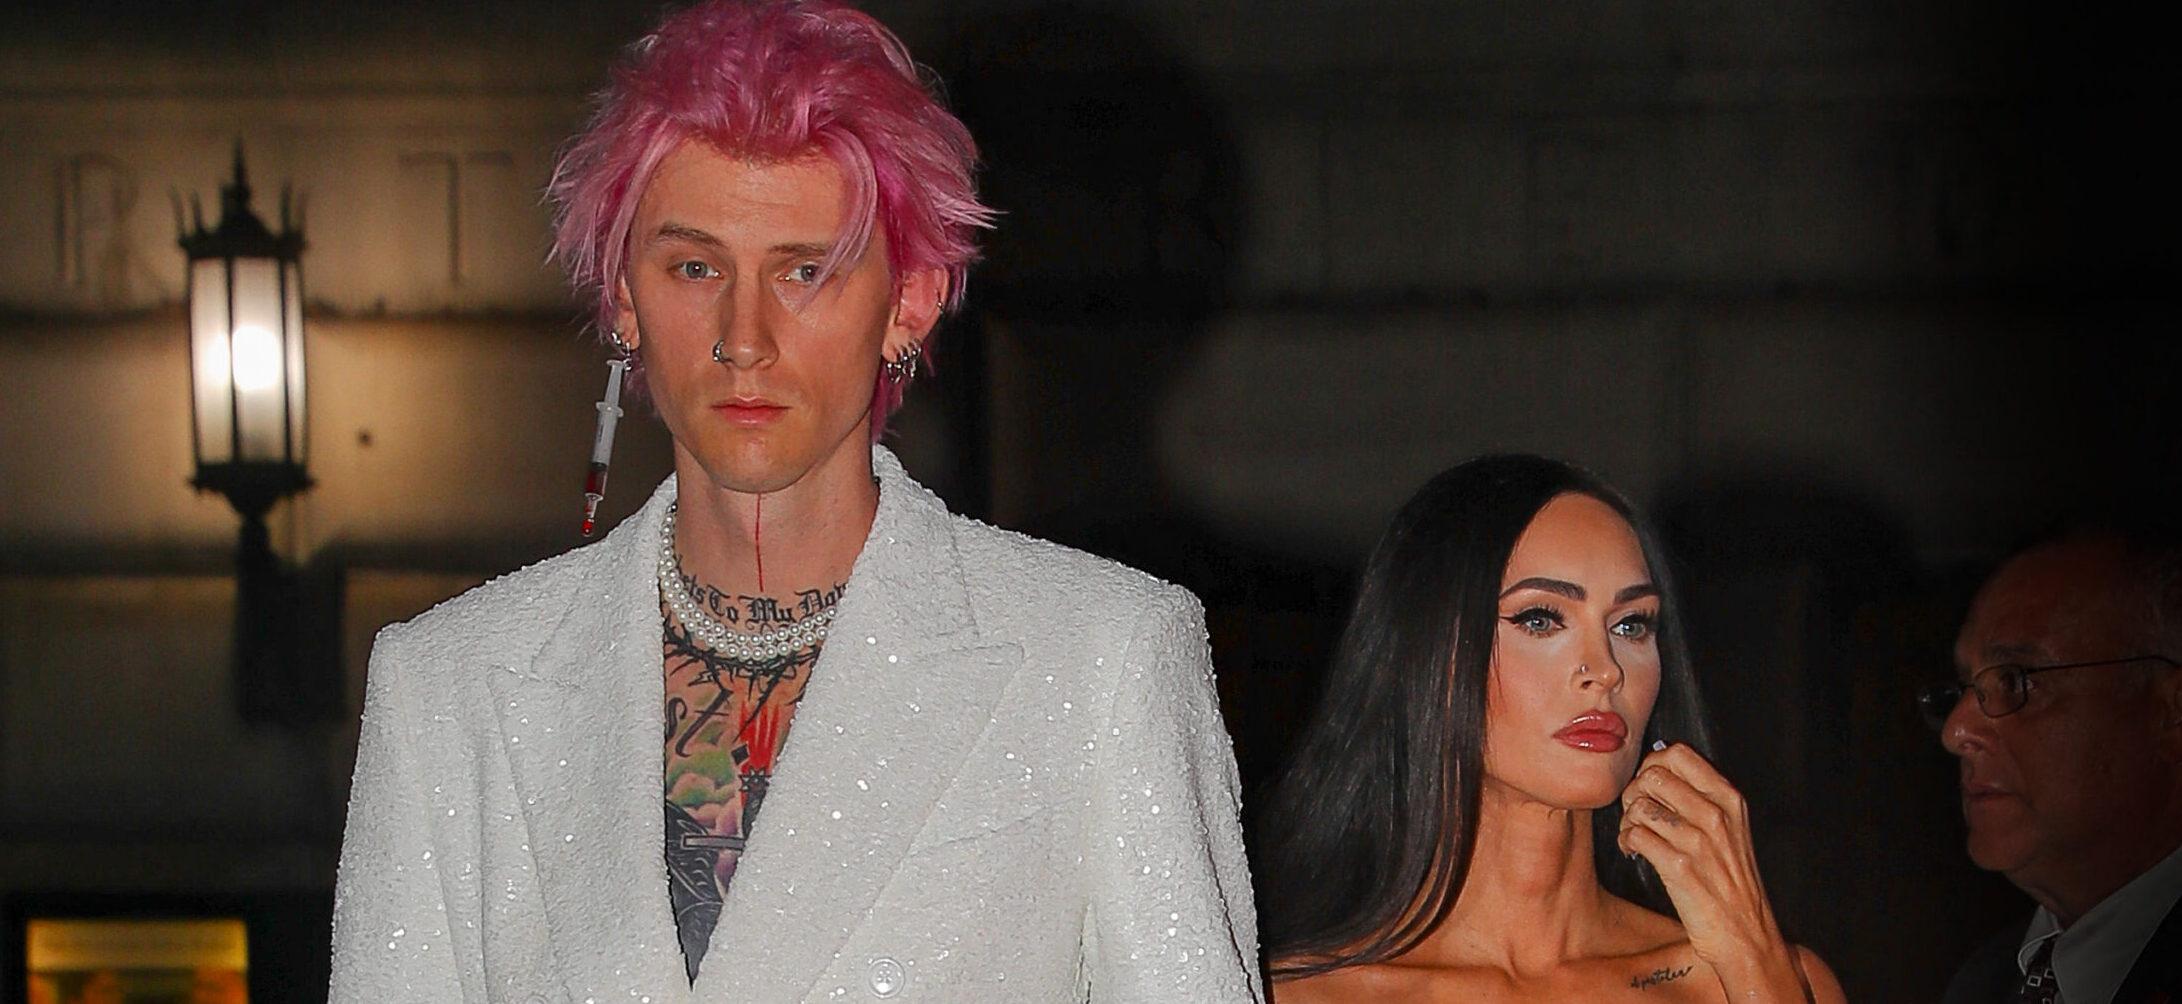 Megan Fox and Machine Gun Kelly arrived at Salumeria Rosi for dinner after they attended at The Tribeca Film Festival at The Beacon Theatre in New York City